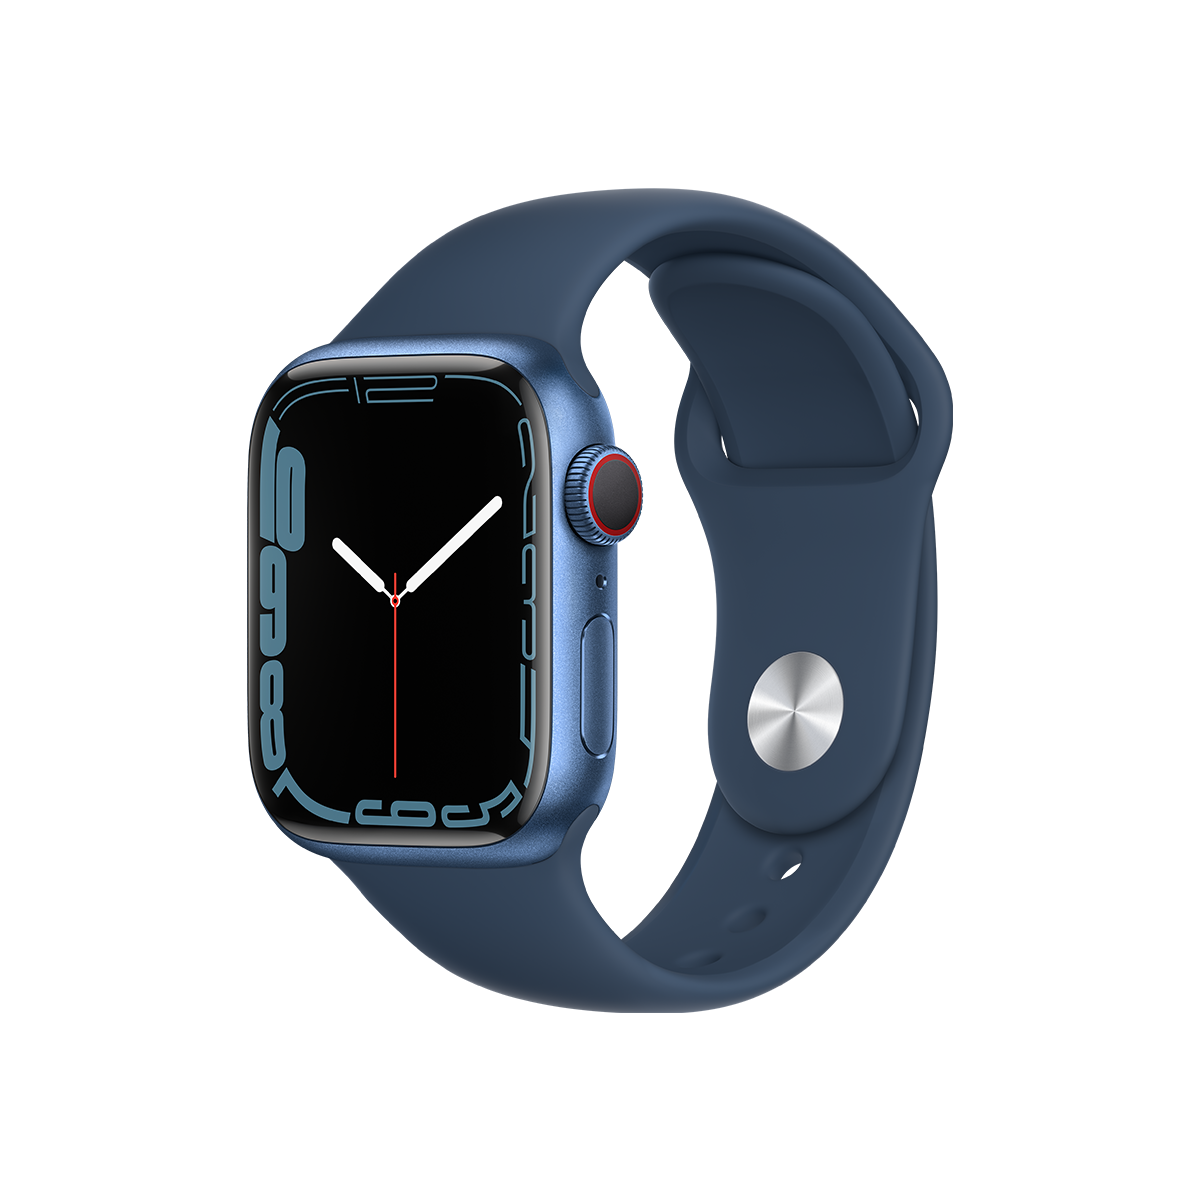 Apple Watch Series 7, now available in Vodafone offer